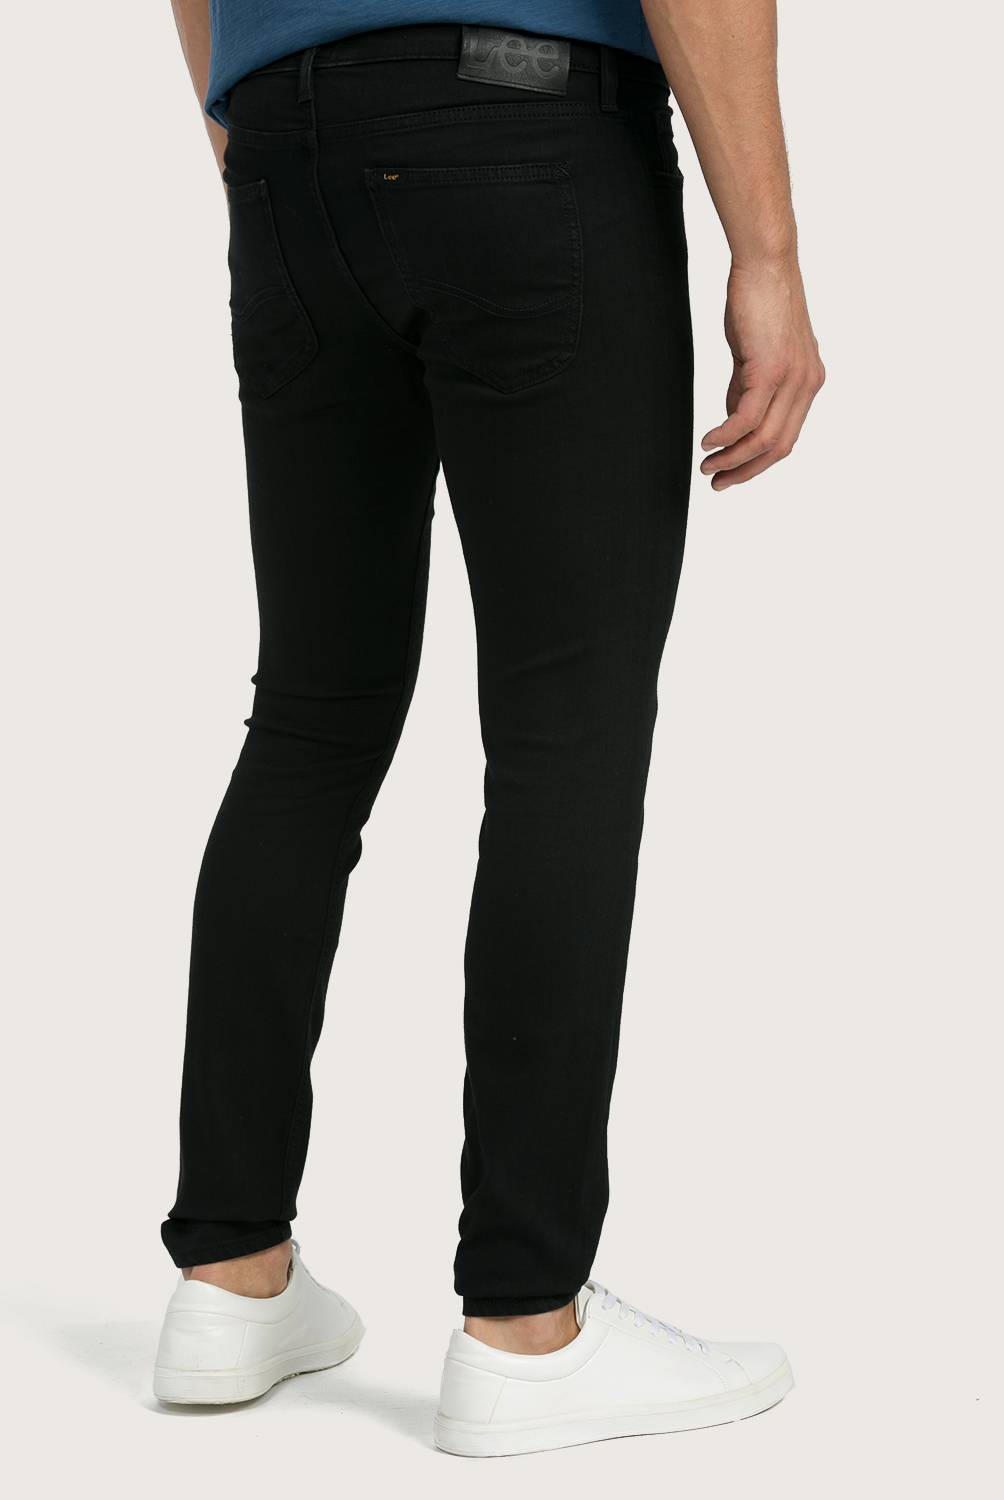 LEE - Jeans Malone Skinny Fit Hombre Lee